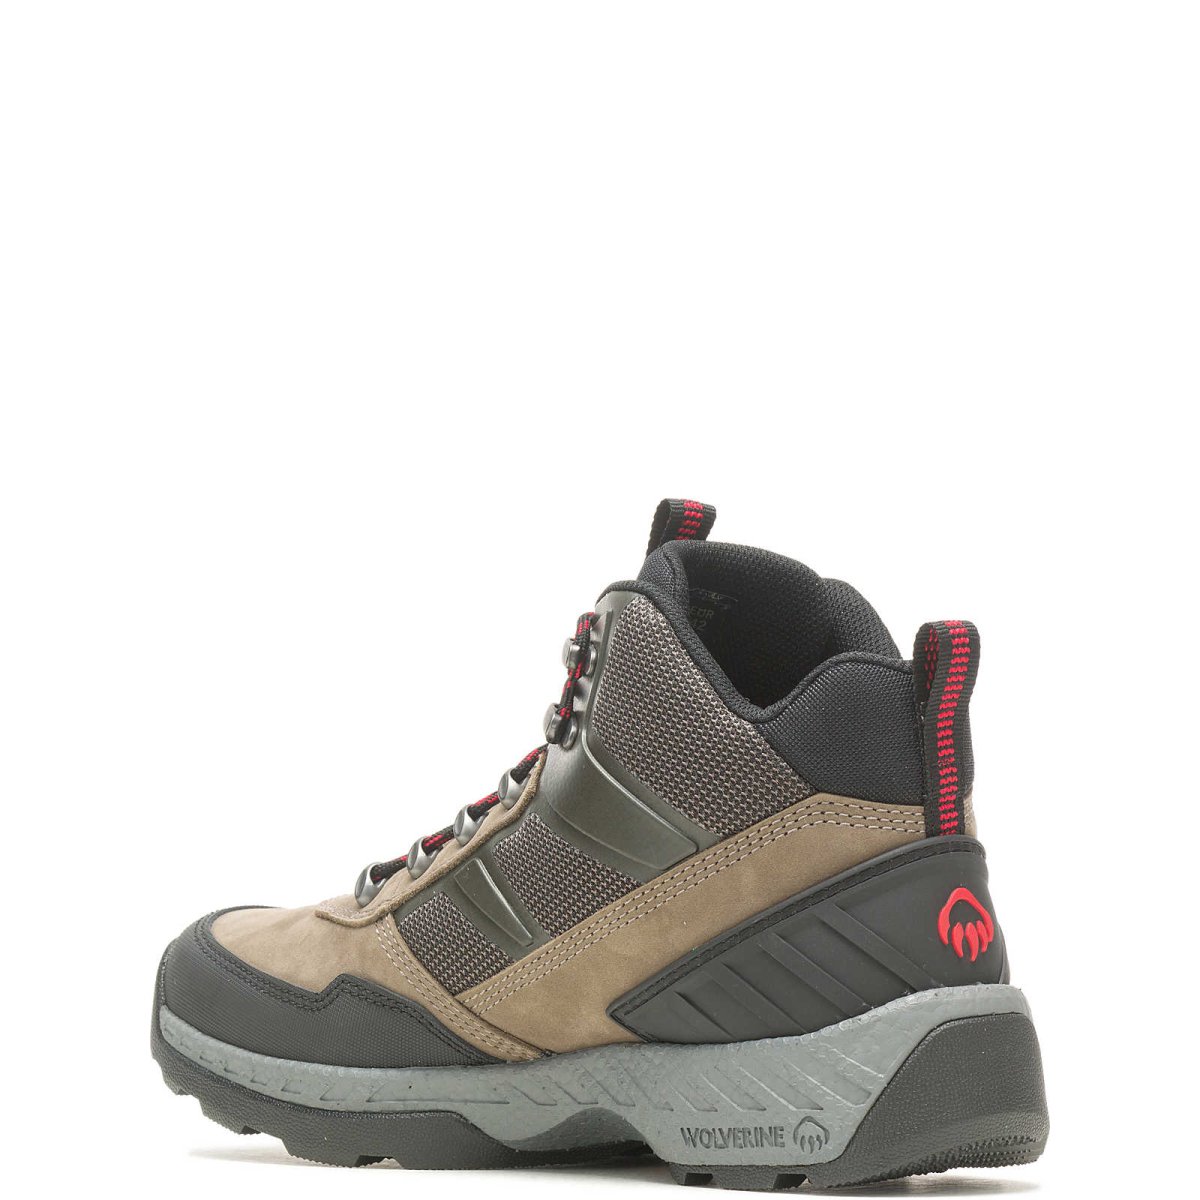 WOLVERINE GUIDE MID USPRG MEN'S BOOT (W880416) IN BUNGEE CORD - TLW Shoes